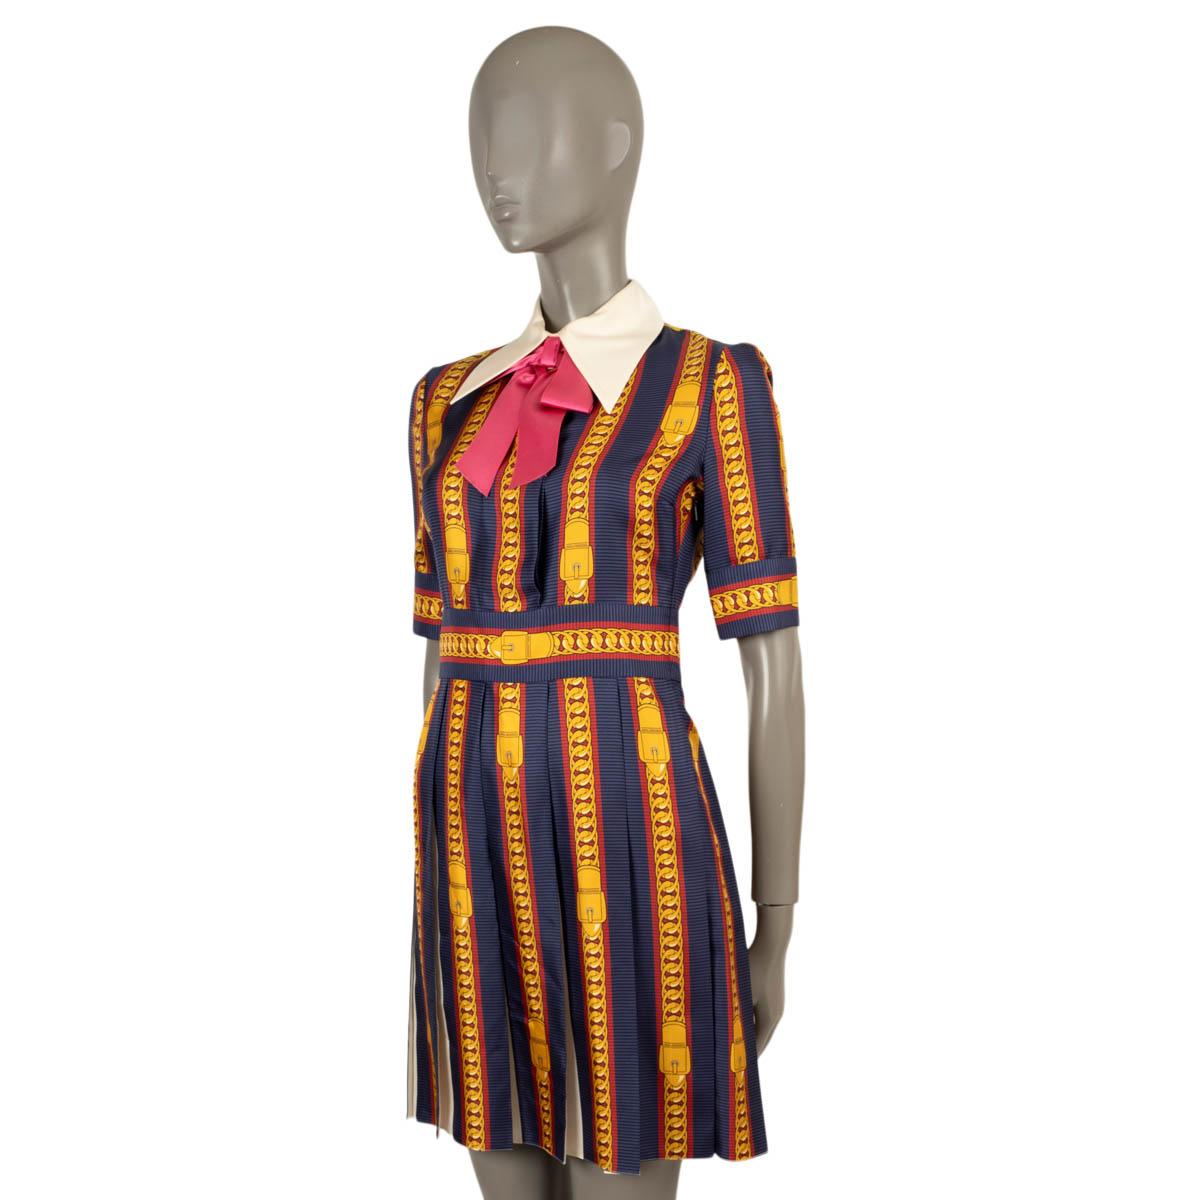 100% authentic Gucci short sleeve dress in navy blue silk twill (100%) with Sylvie Chain print in gold, black and red. Features a white collar with pink bow. Closes with a concealed zipper on the side. Unlined. Has been worn and is in excellent